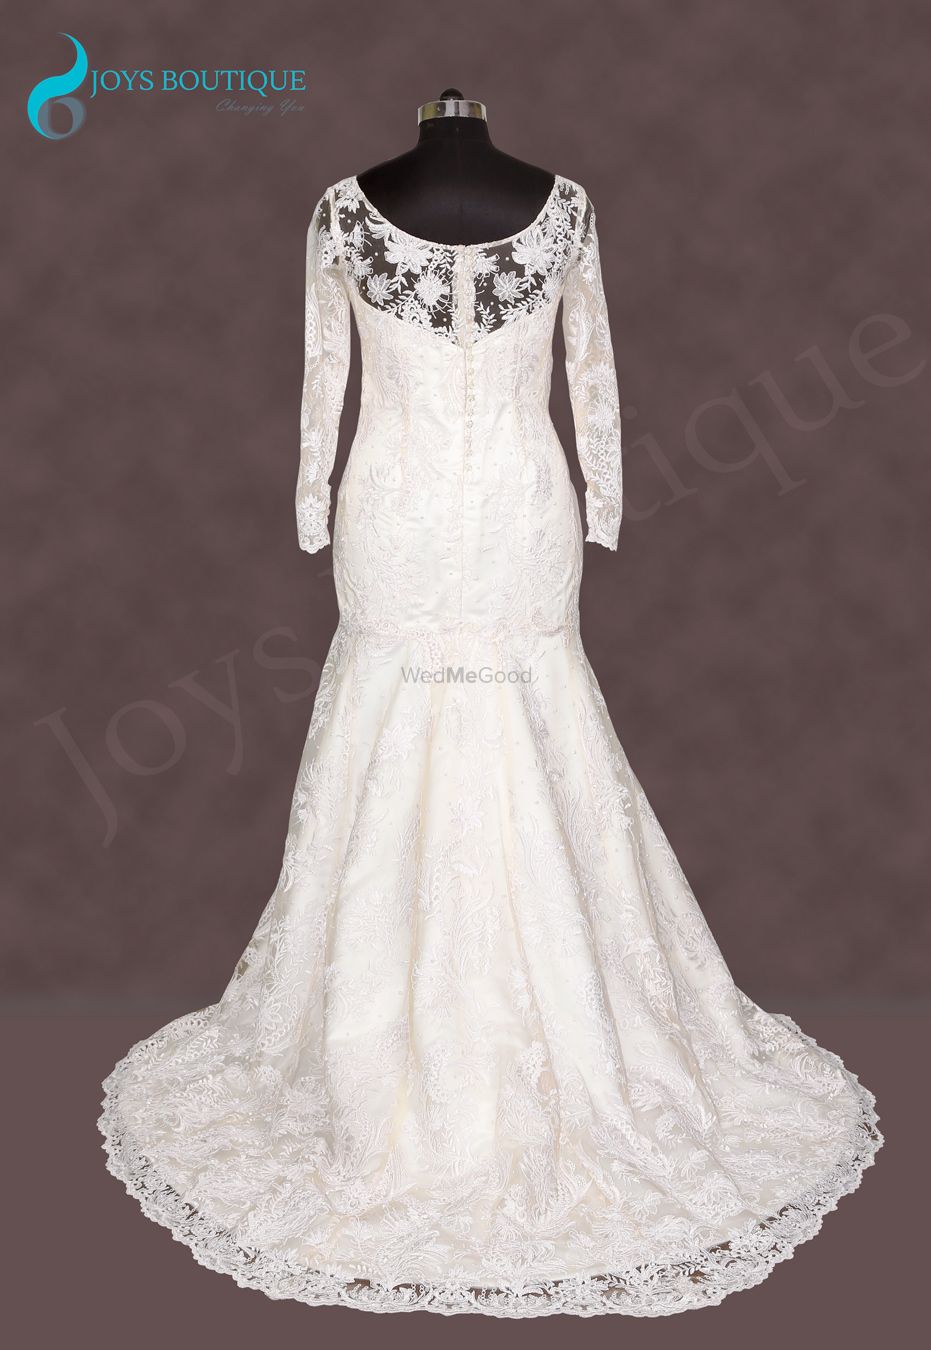 Photo From New Wedding Collection Fish cut Gown - By Joys Boutique